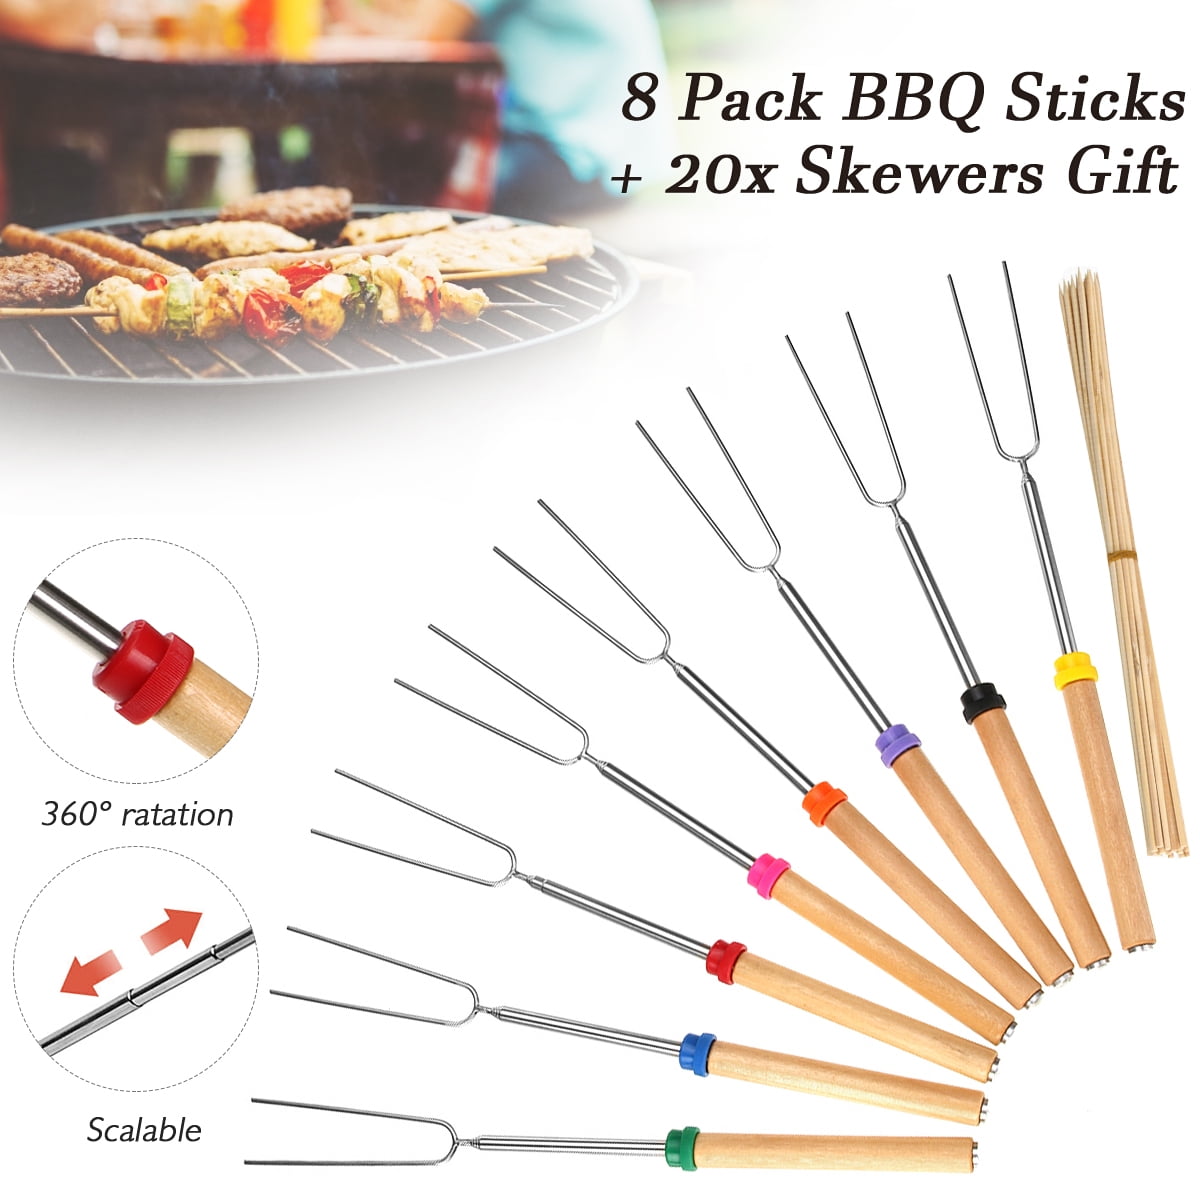 Stainless 16" Wooden Handle Reusable BBQ Fork Roasting Stick BBQ Skewer Sitck 